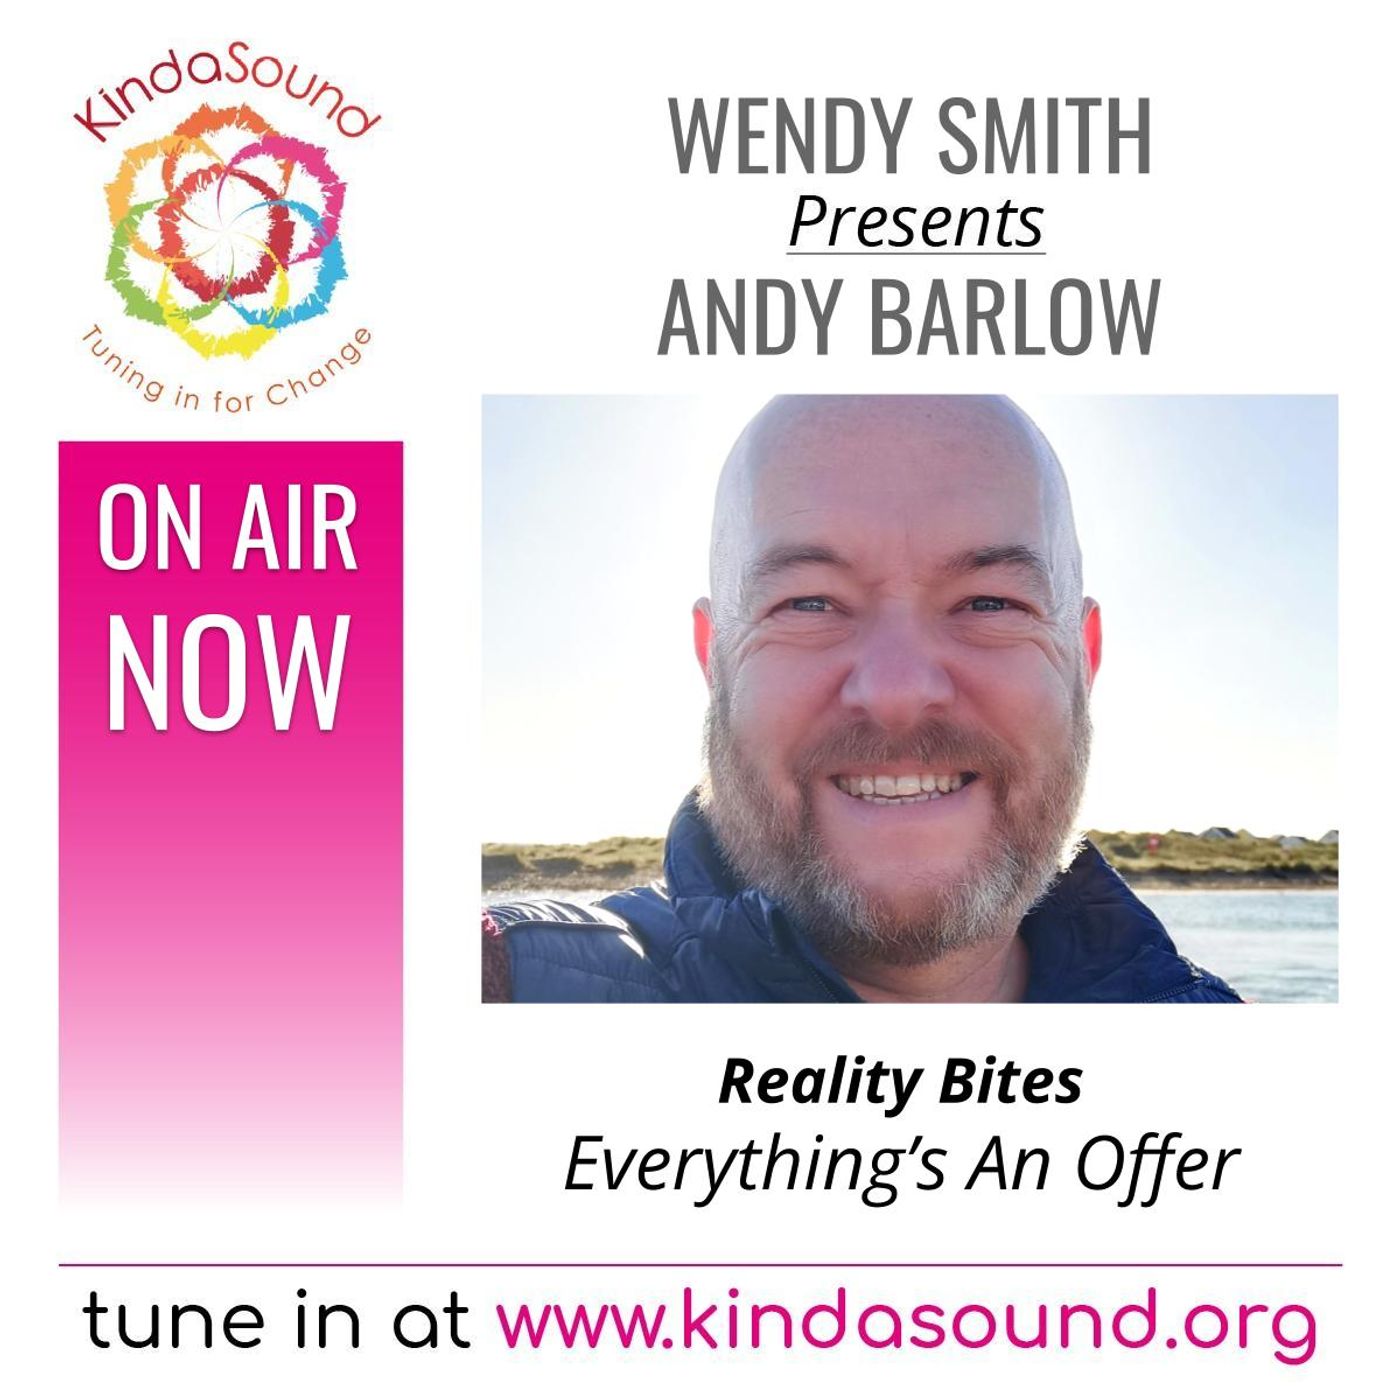 It's Just an Offer | Andy Barlow on Reality Bites with Wendy Smith